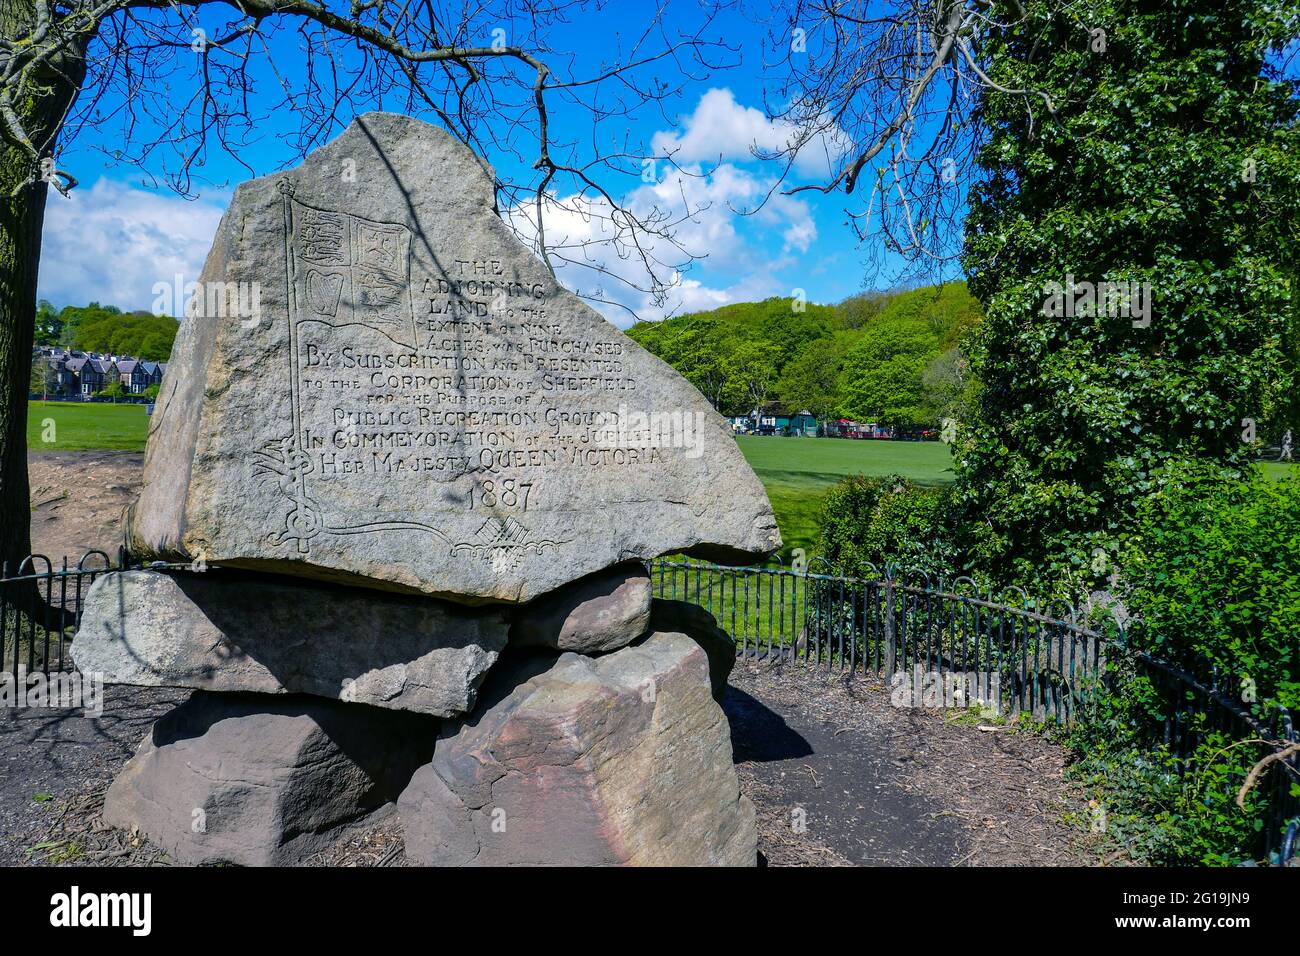 Gritstone boulder with text, Endcliffe Park in Summer in Sheffield, South Yorkshire, North of England, UK Stock Photo